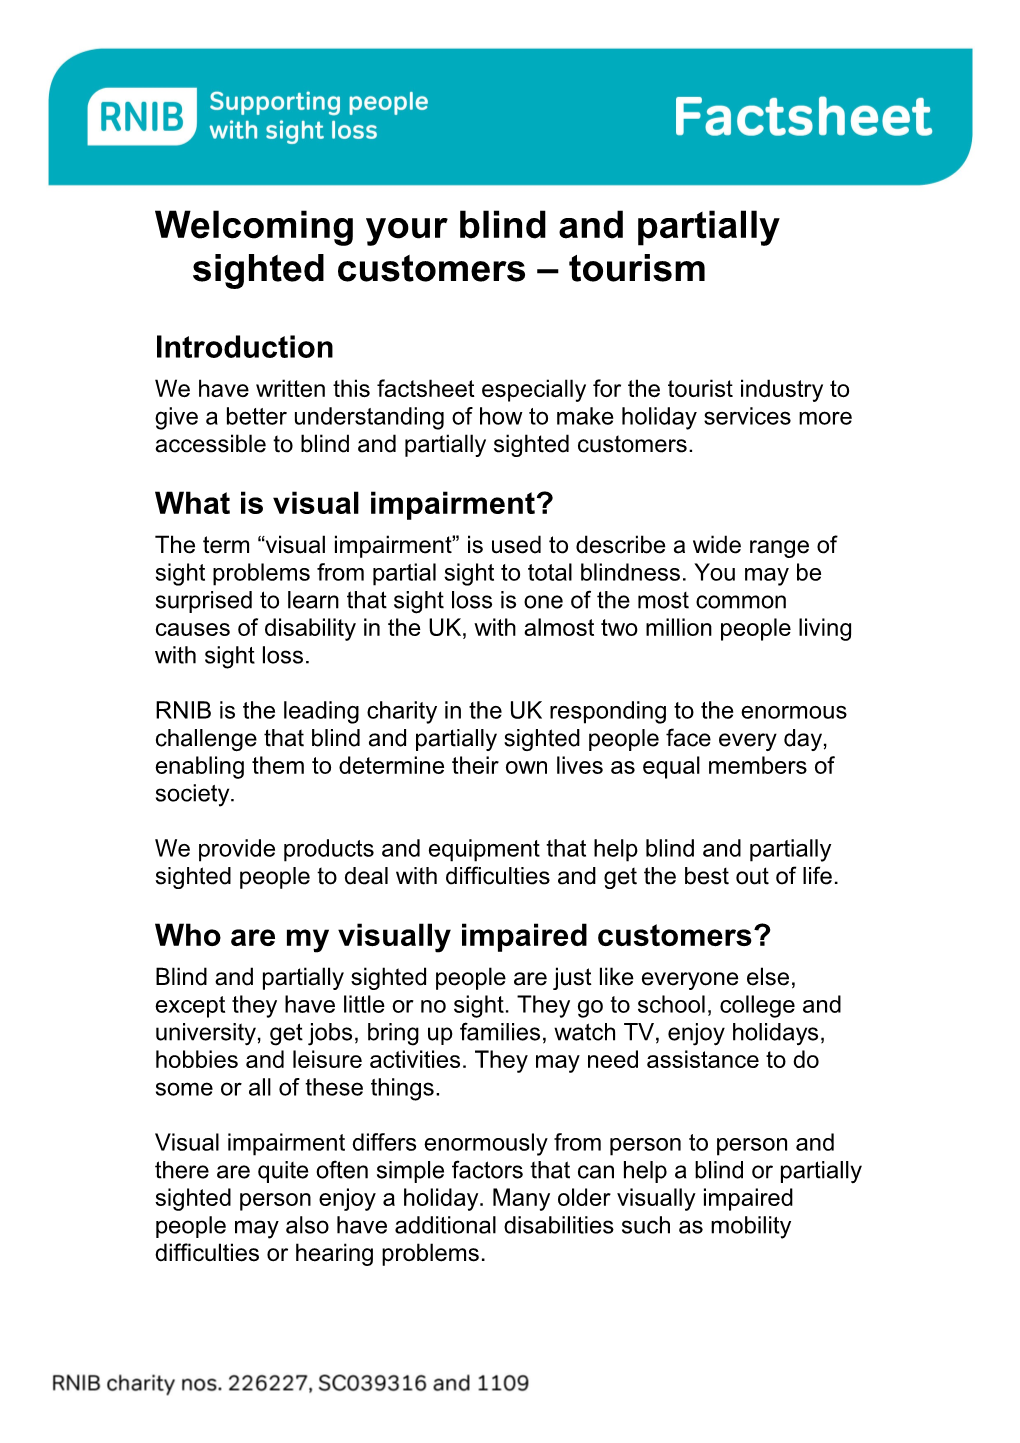 Welcoming Your Blind and Partially Sighted Customers Tourism